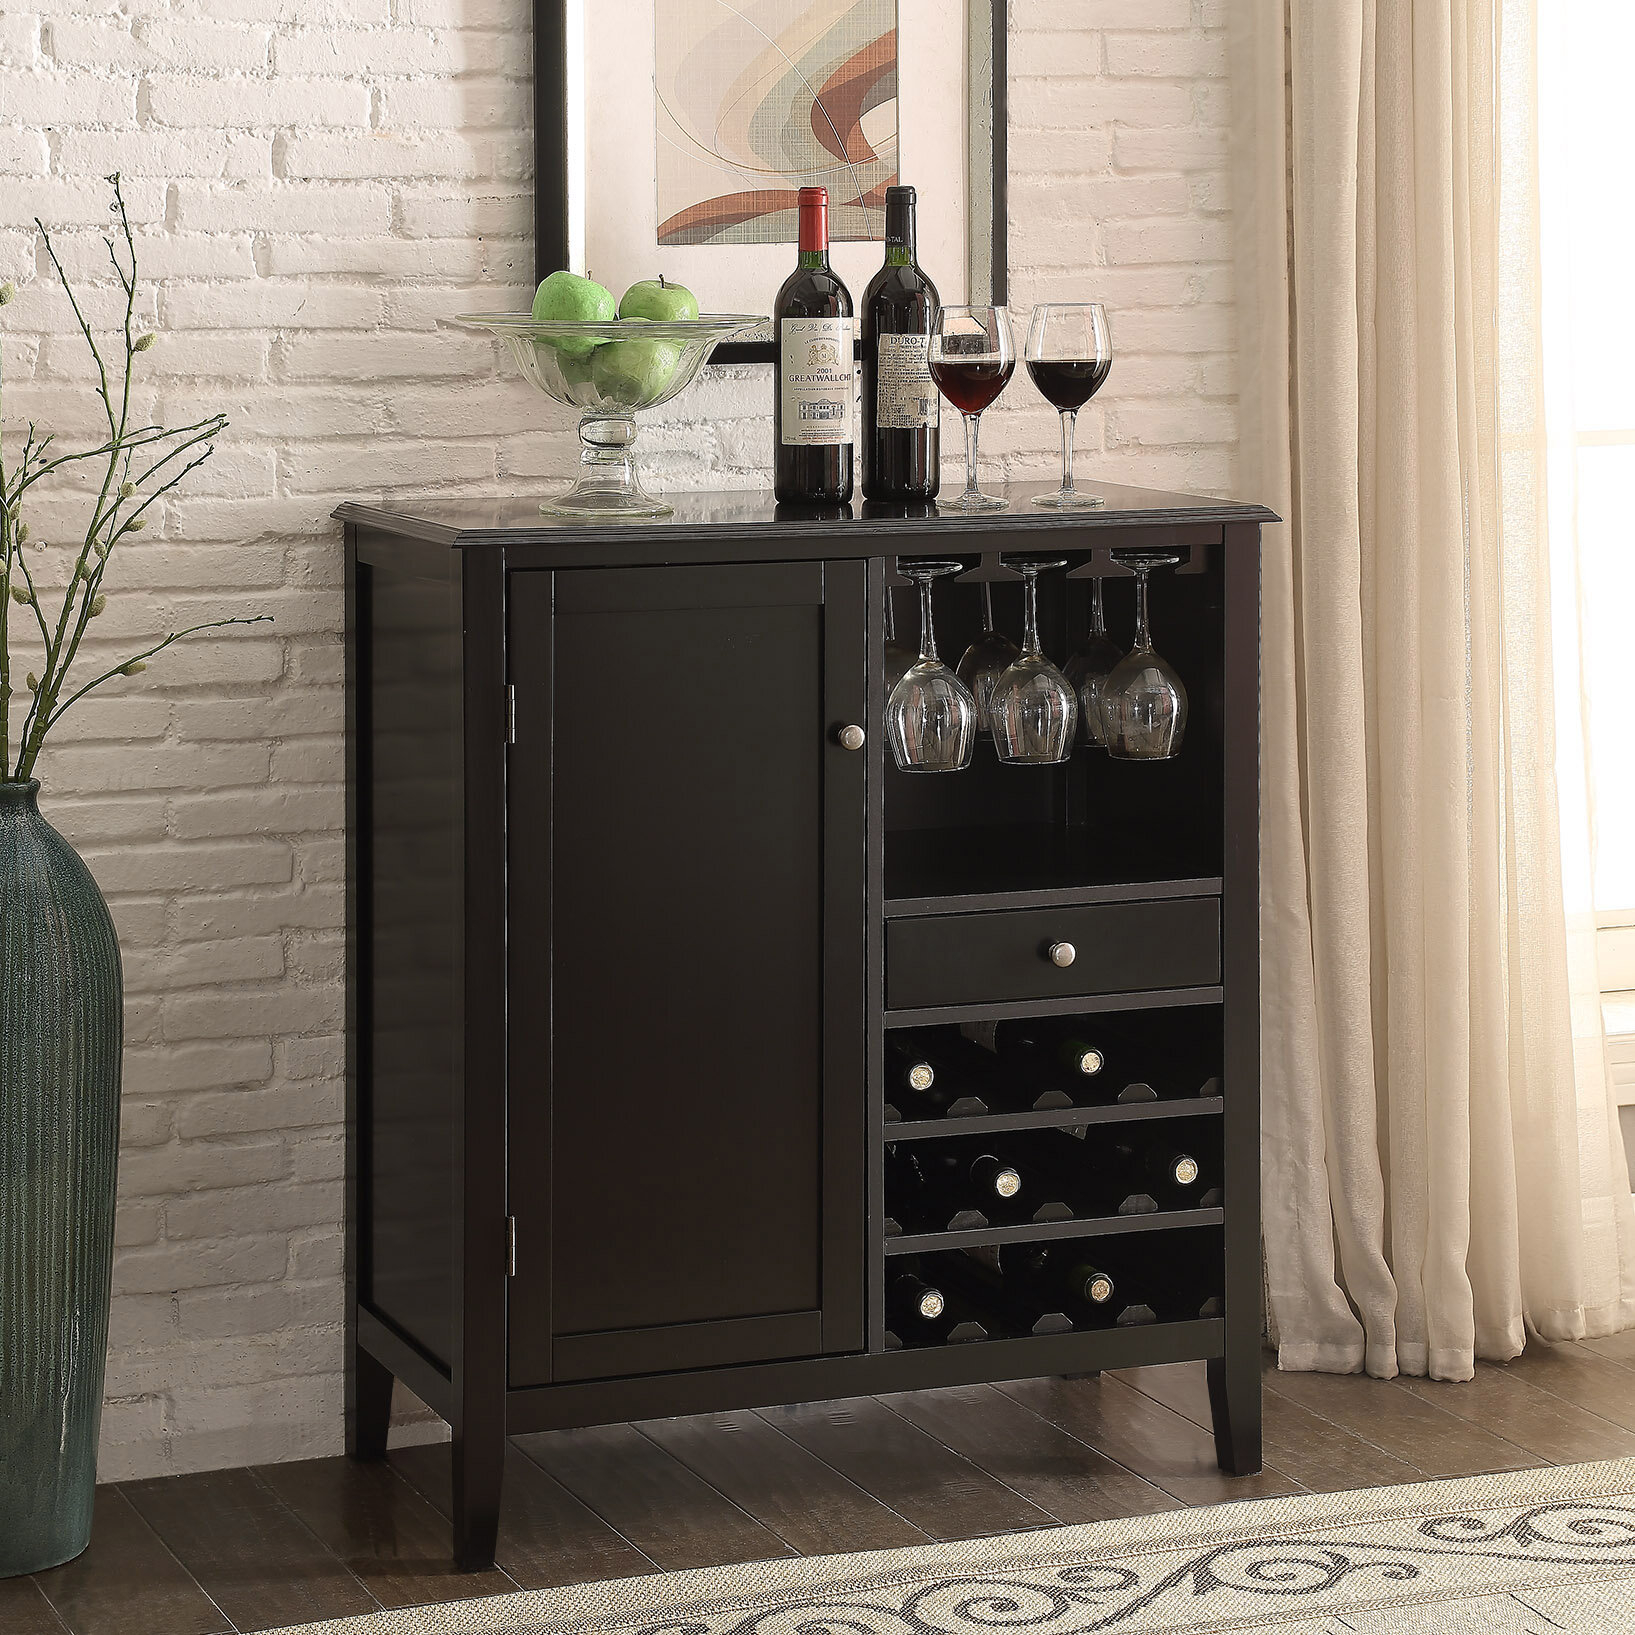 Cabernet Mini Bar With Wine Storage pertaining to measurements 1635 X 1635